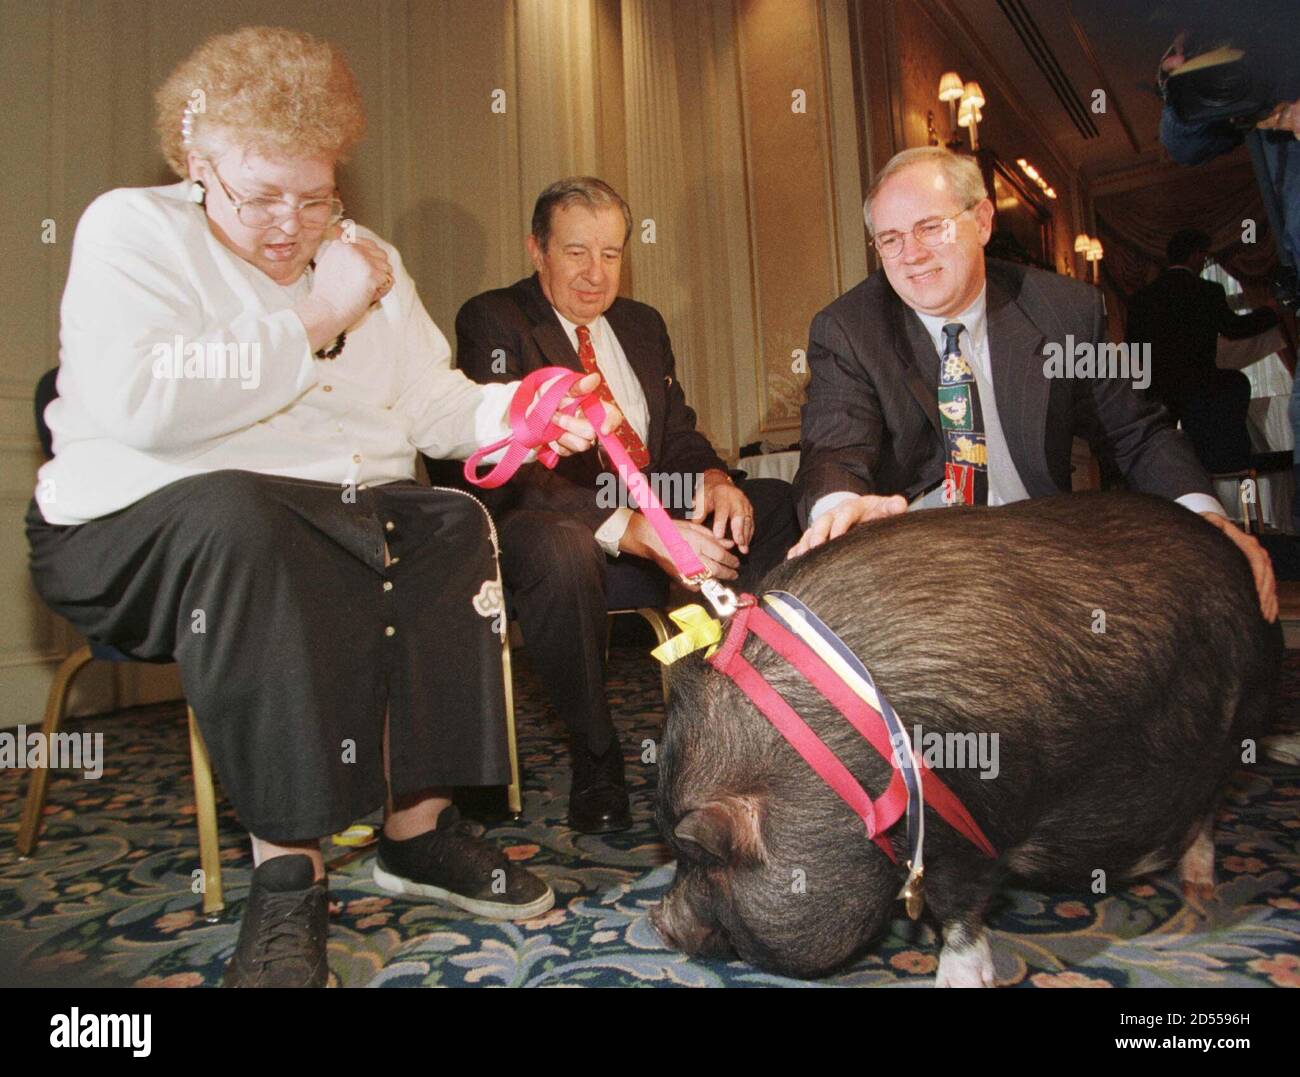 LuLu, a 150-pound potbellied pig, is positioned for photos with owner JoAnn  Altsman, (L) at the American Society for the Prevention of Cruelty to  Animals 1999 National Humane Awards in New York